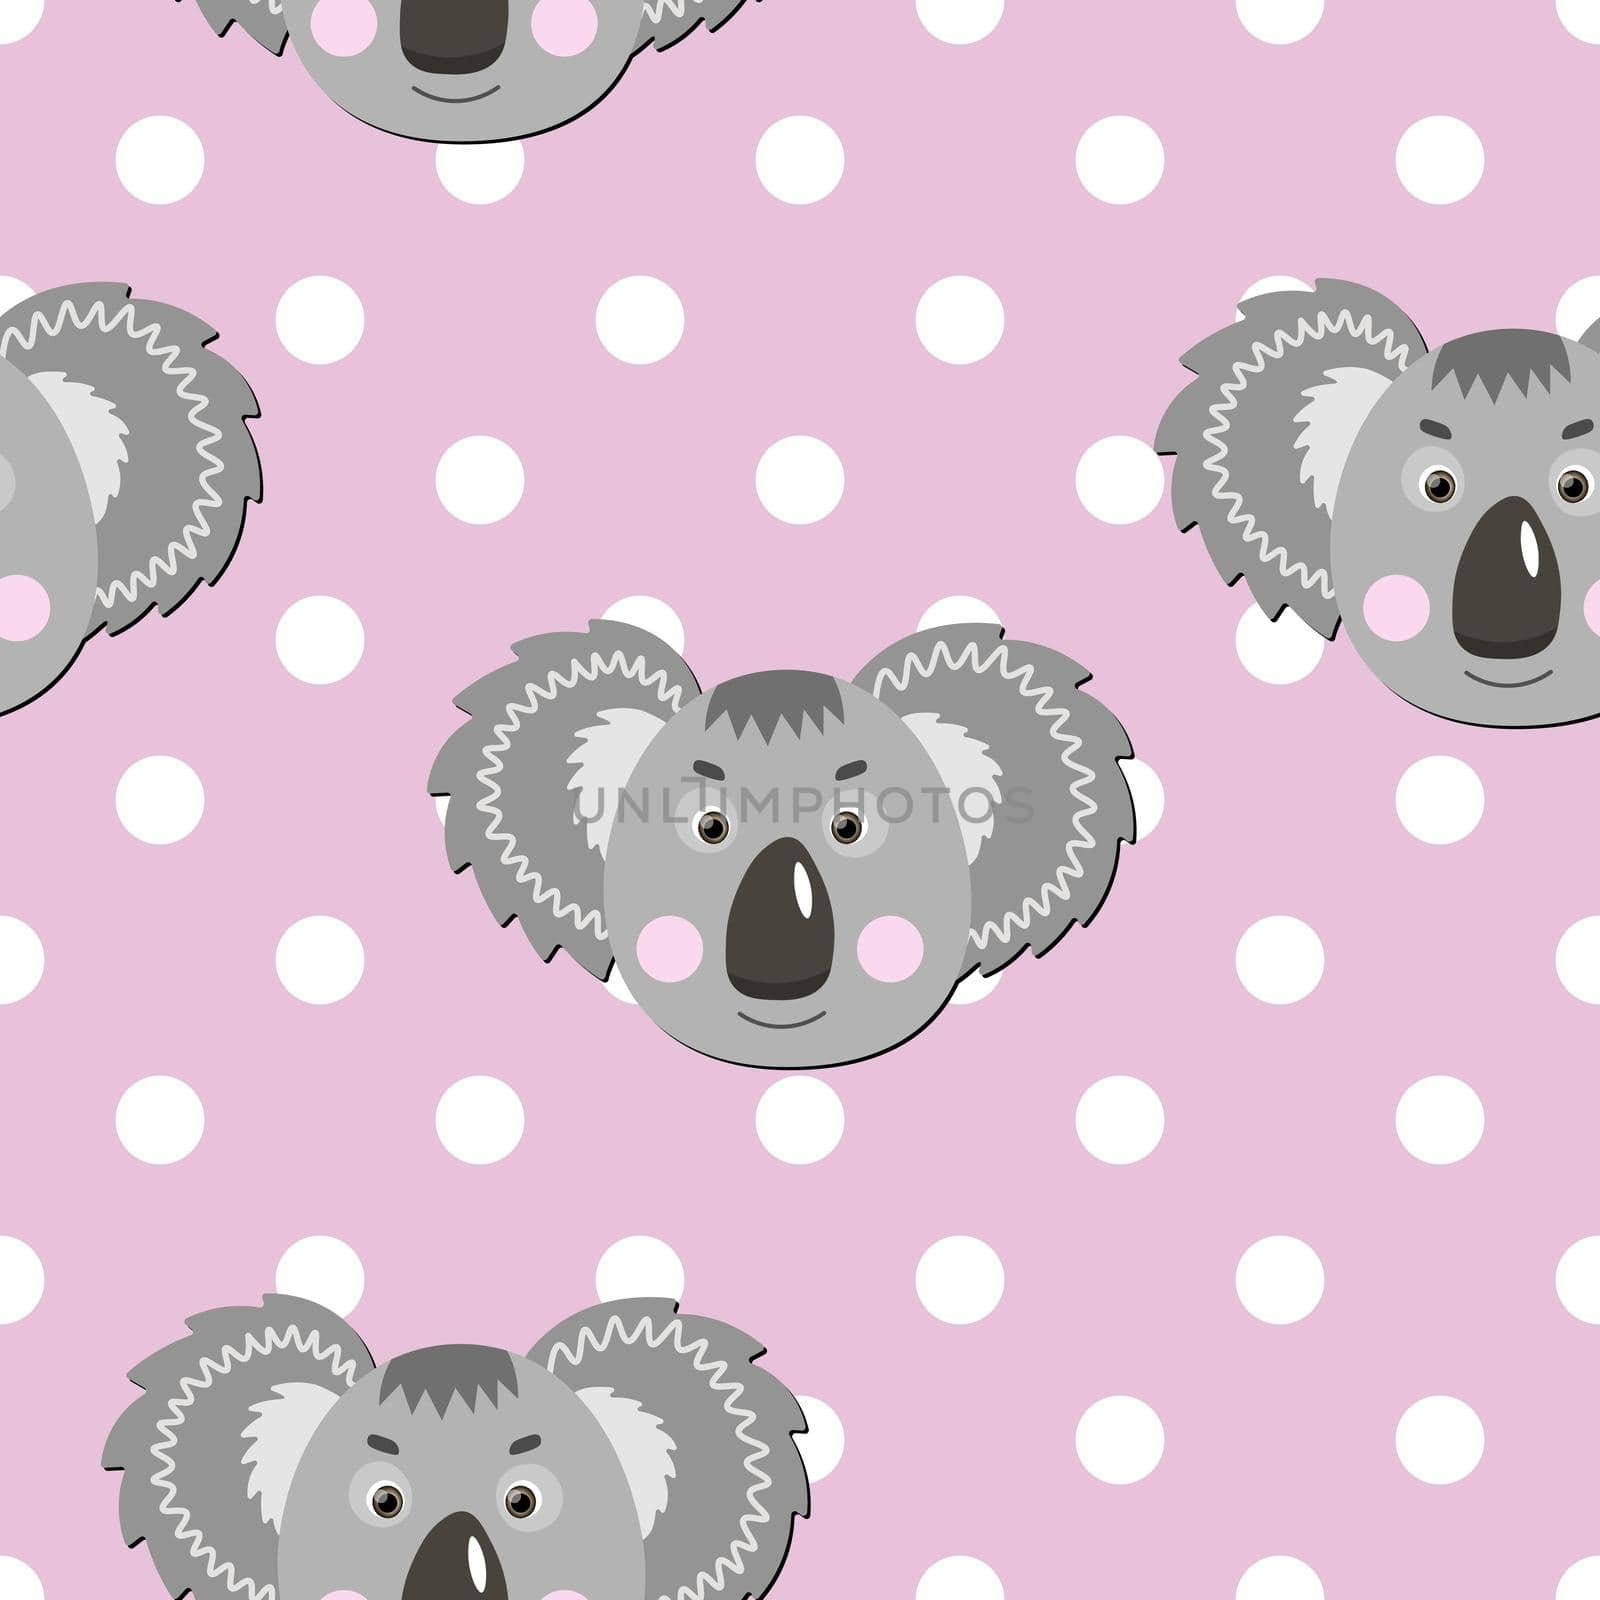 Vector flat animals colorful illustration for kids. Seamless pattern with cute koala face on pink polka dots background. Adorable cartoon character. Design for card, poster, fabric, textile. by allaku